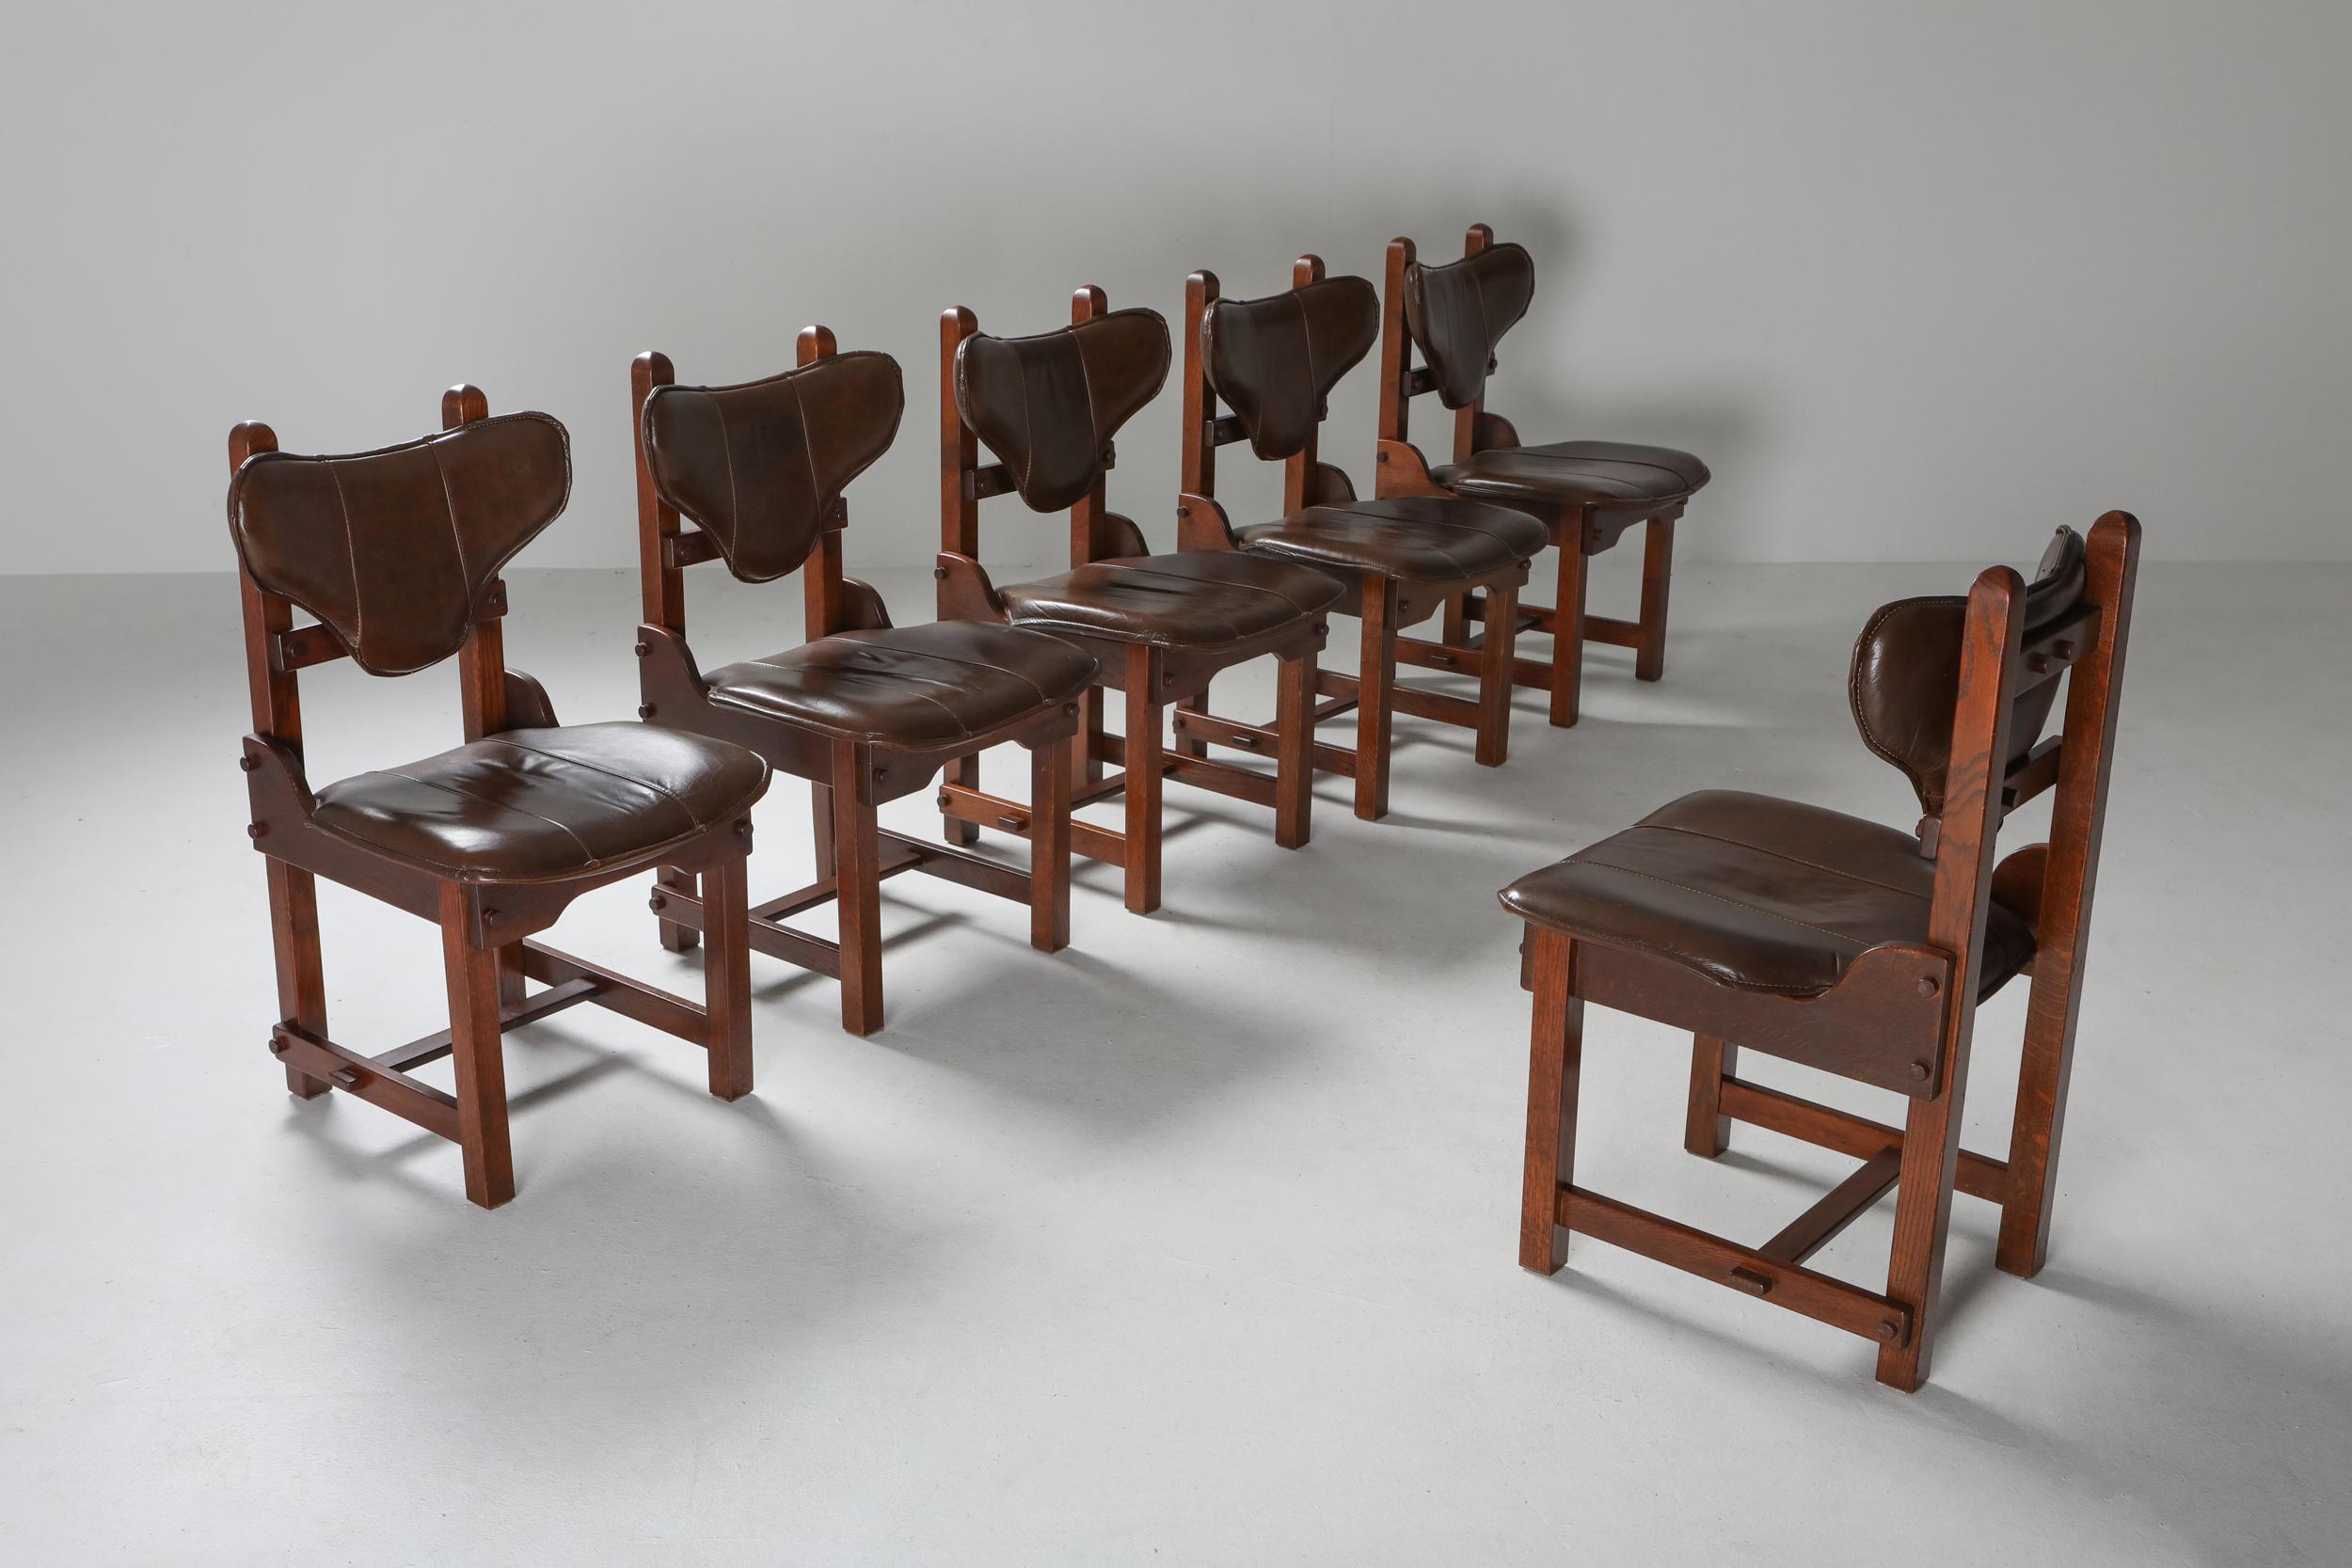 Brutalist set of six dining chairs in solid stained oak, original leather upholstery. 

Brutalism is an architectural style started from the mid-20th century, aiming for raw, geometric and compromise-less buildings. Characterised by blatant